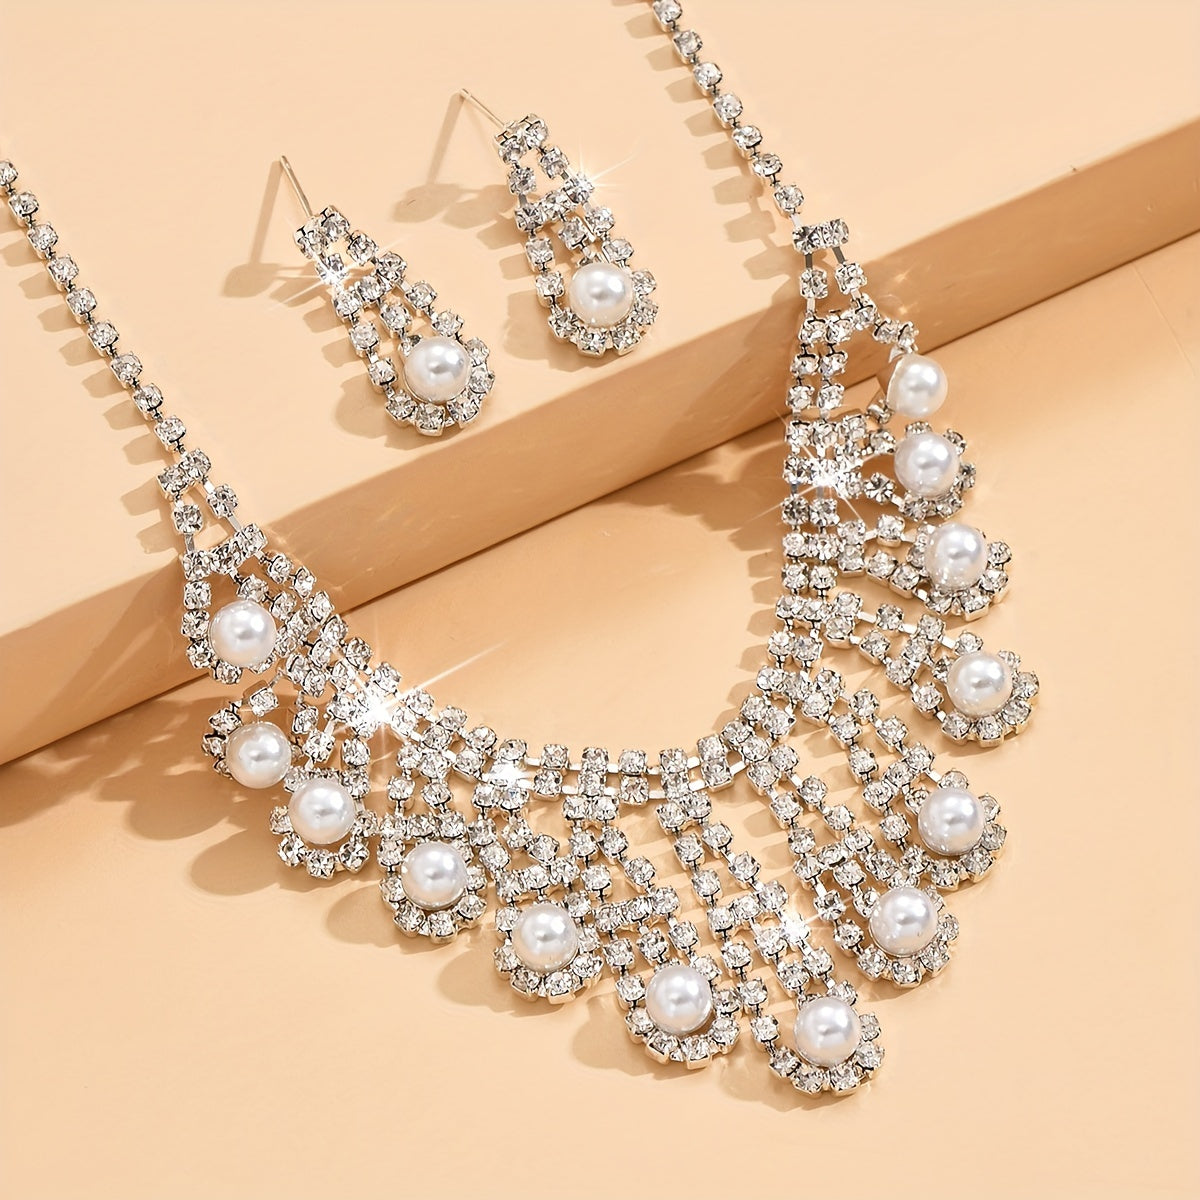 3pcs Earrings Plus Necklace Elegant Jewelry Set Silver Plated Inlaid Rhinestone Classic Engagement Wedding Jewelry For Bride Evening Party Cocktail Party Decor